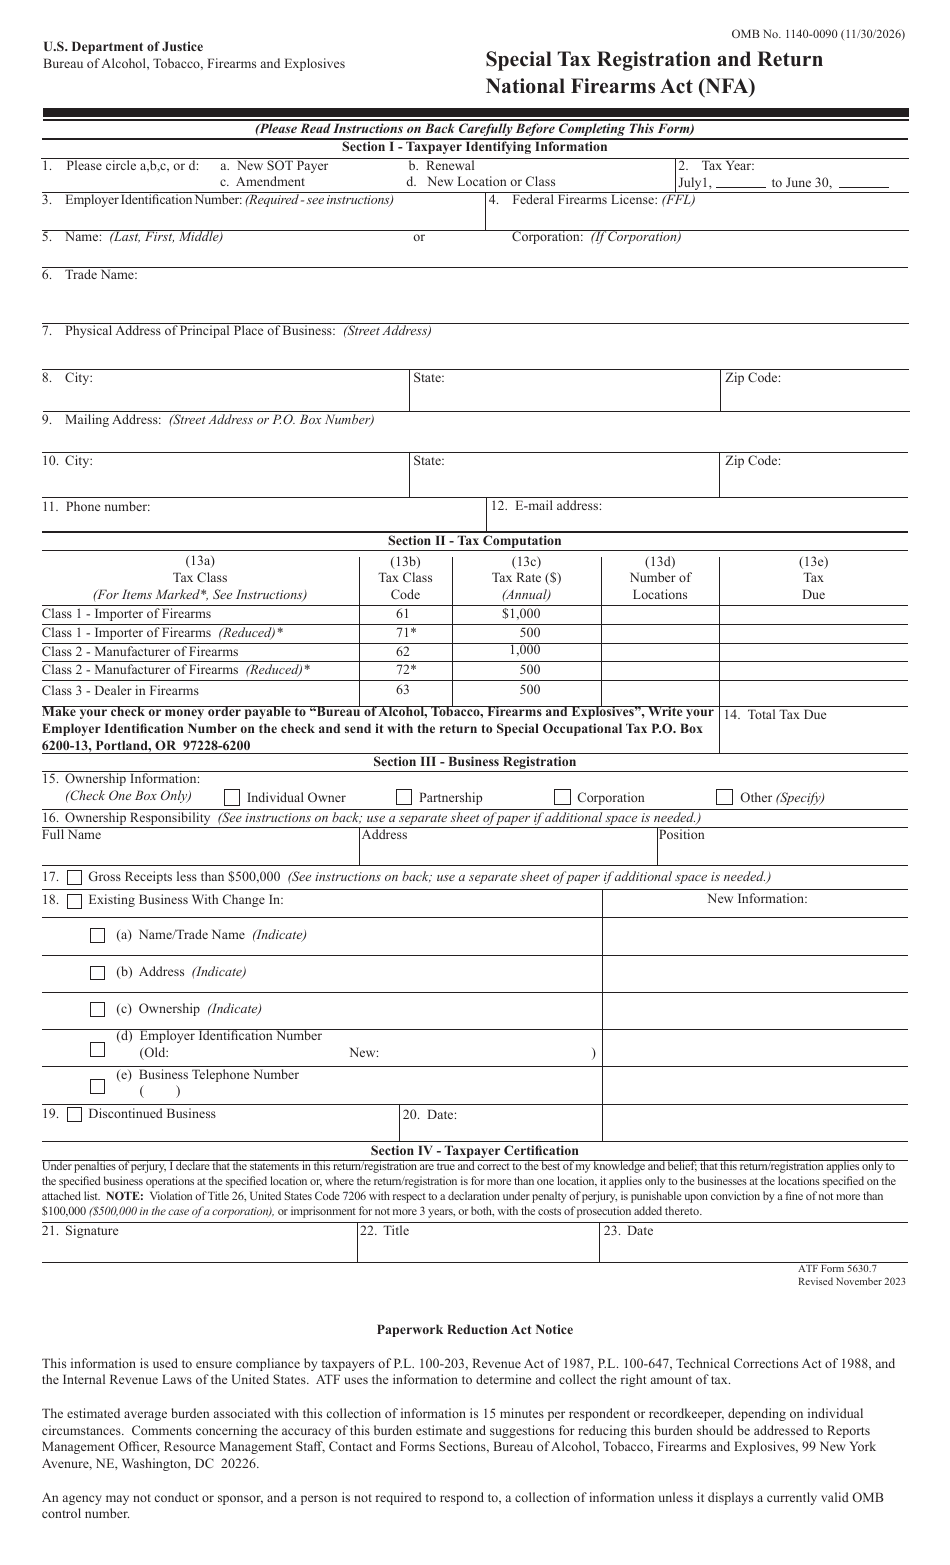 ATF Form 5630.7 Special Tax Registration and Return National Firearms Act (Nfa), Page 1